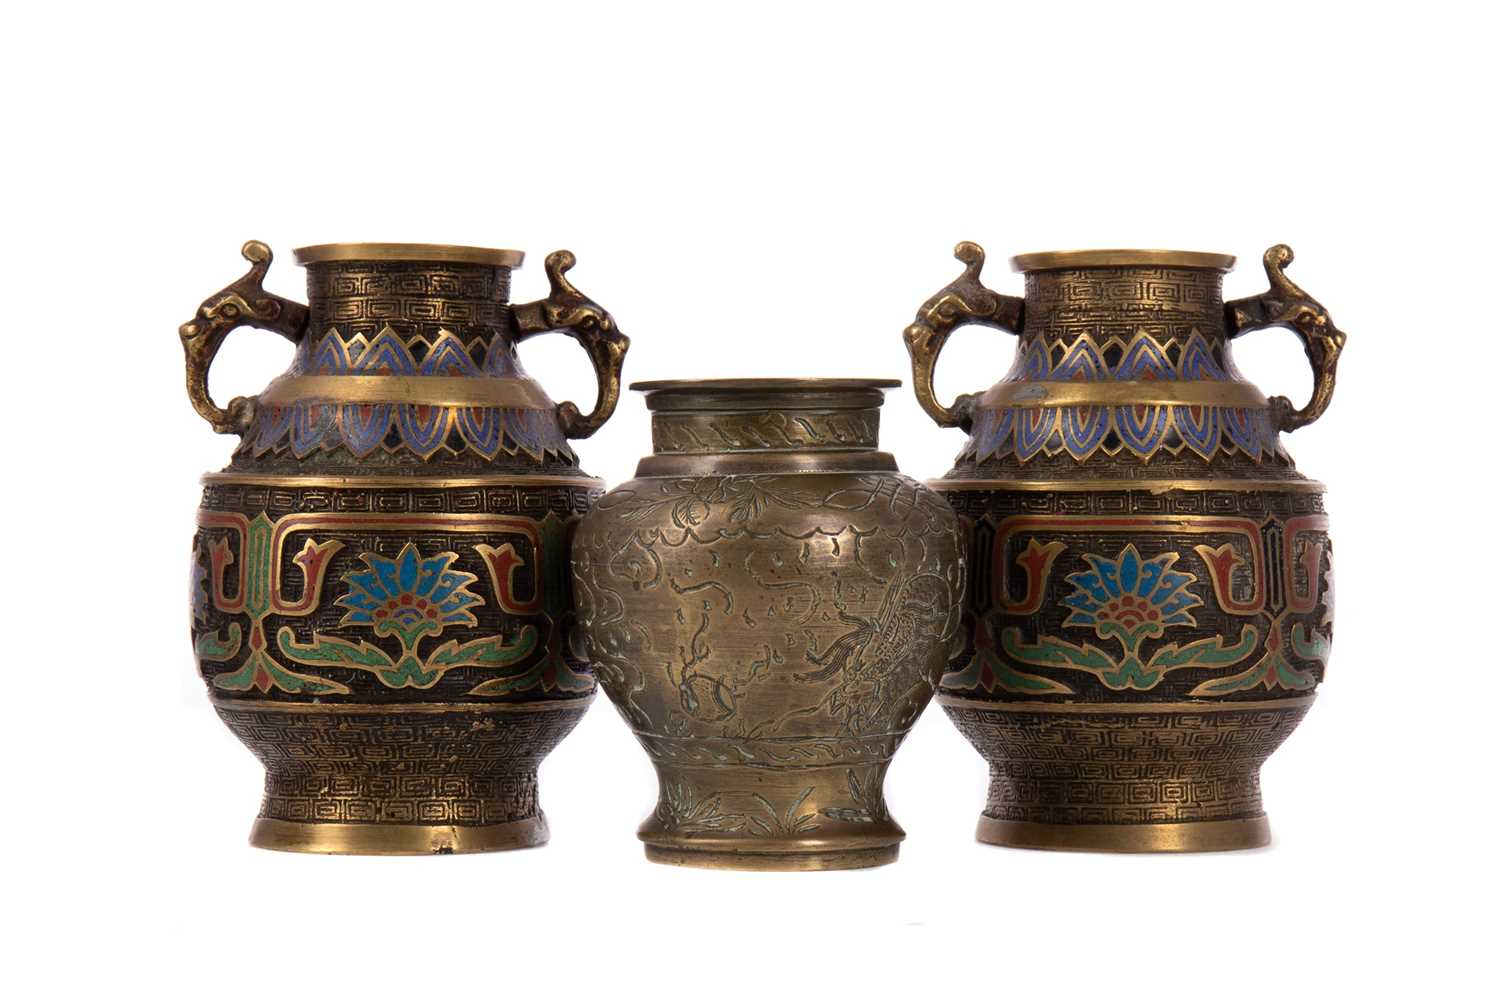 Lot 1847 - A 20TH CENTURY PAIR OF CHINESE ENAMEL BRONZE VASES AND A CHINESE BRONZE VASE